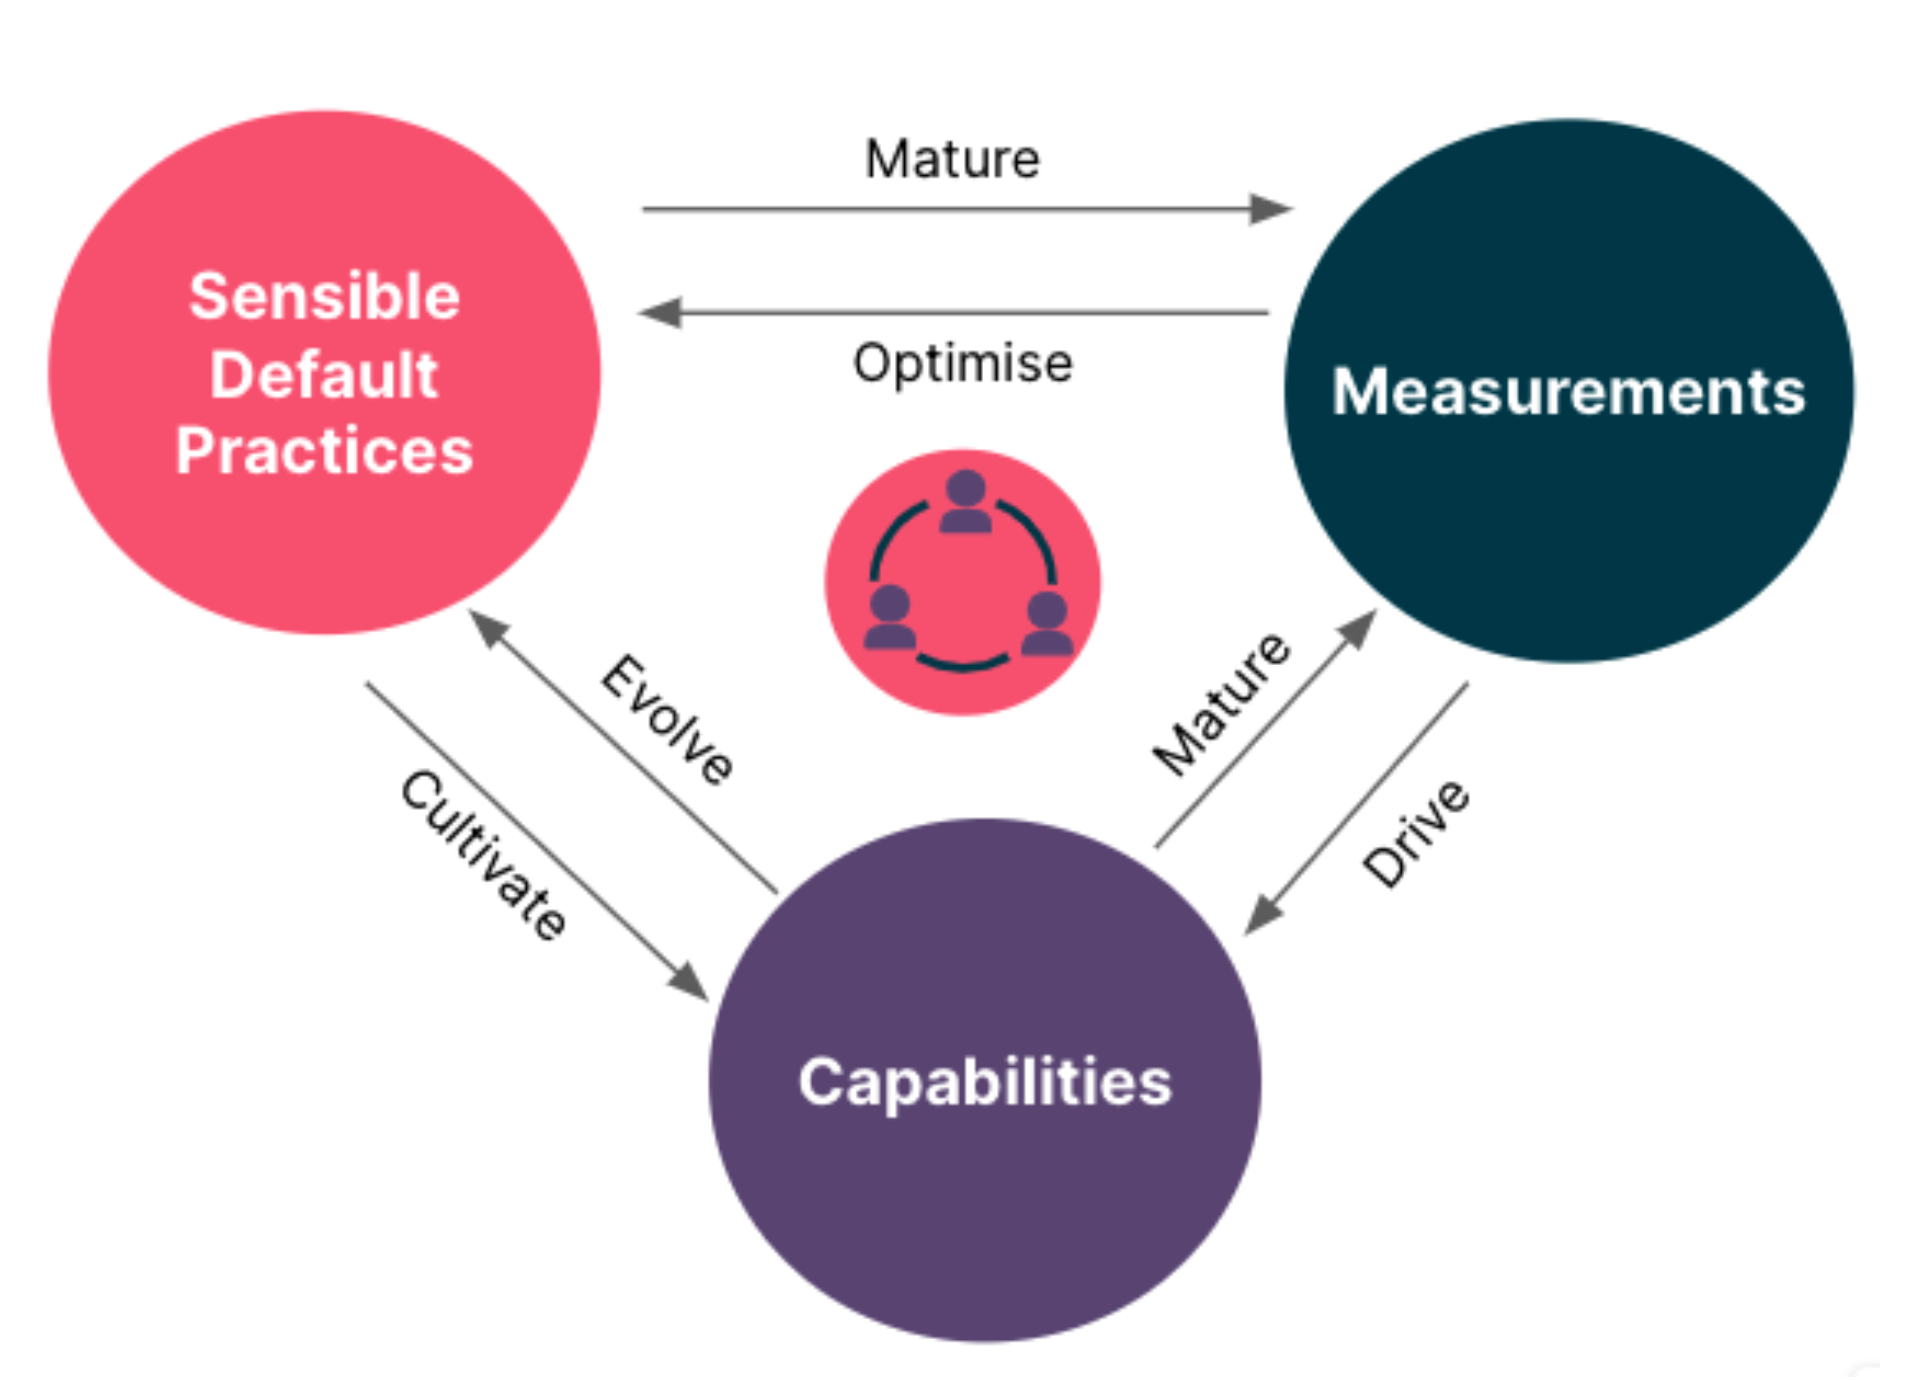 This diagram shows the relationship between sensible default practices, measurements and capabilities which are interrelated and need to improve continuously